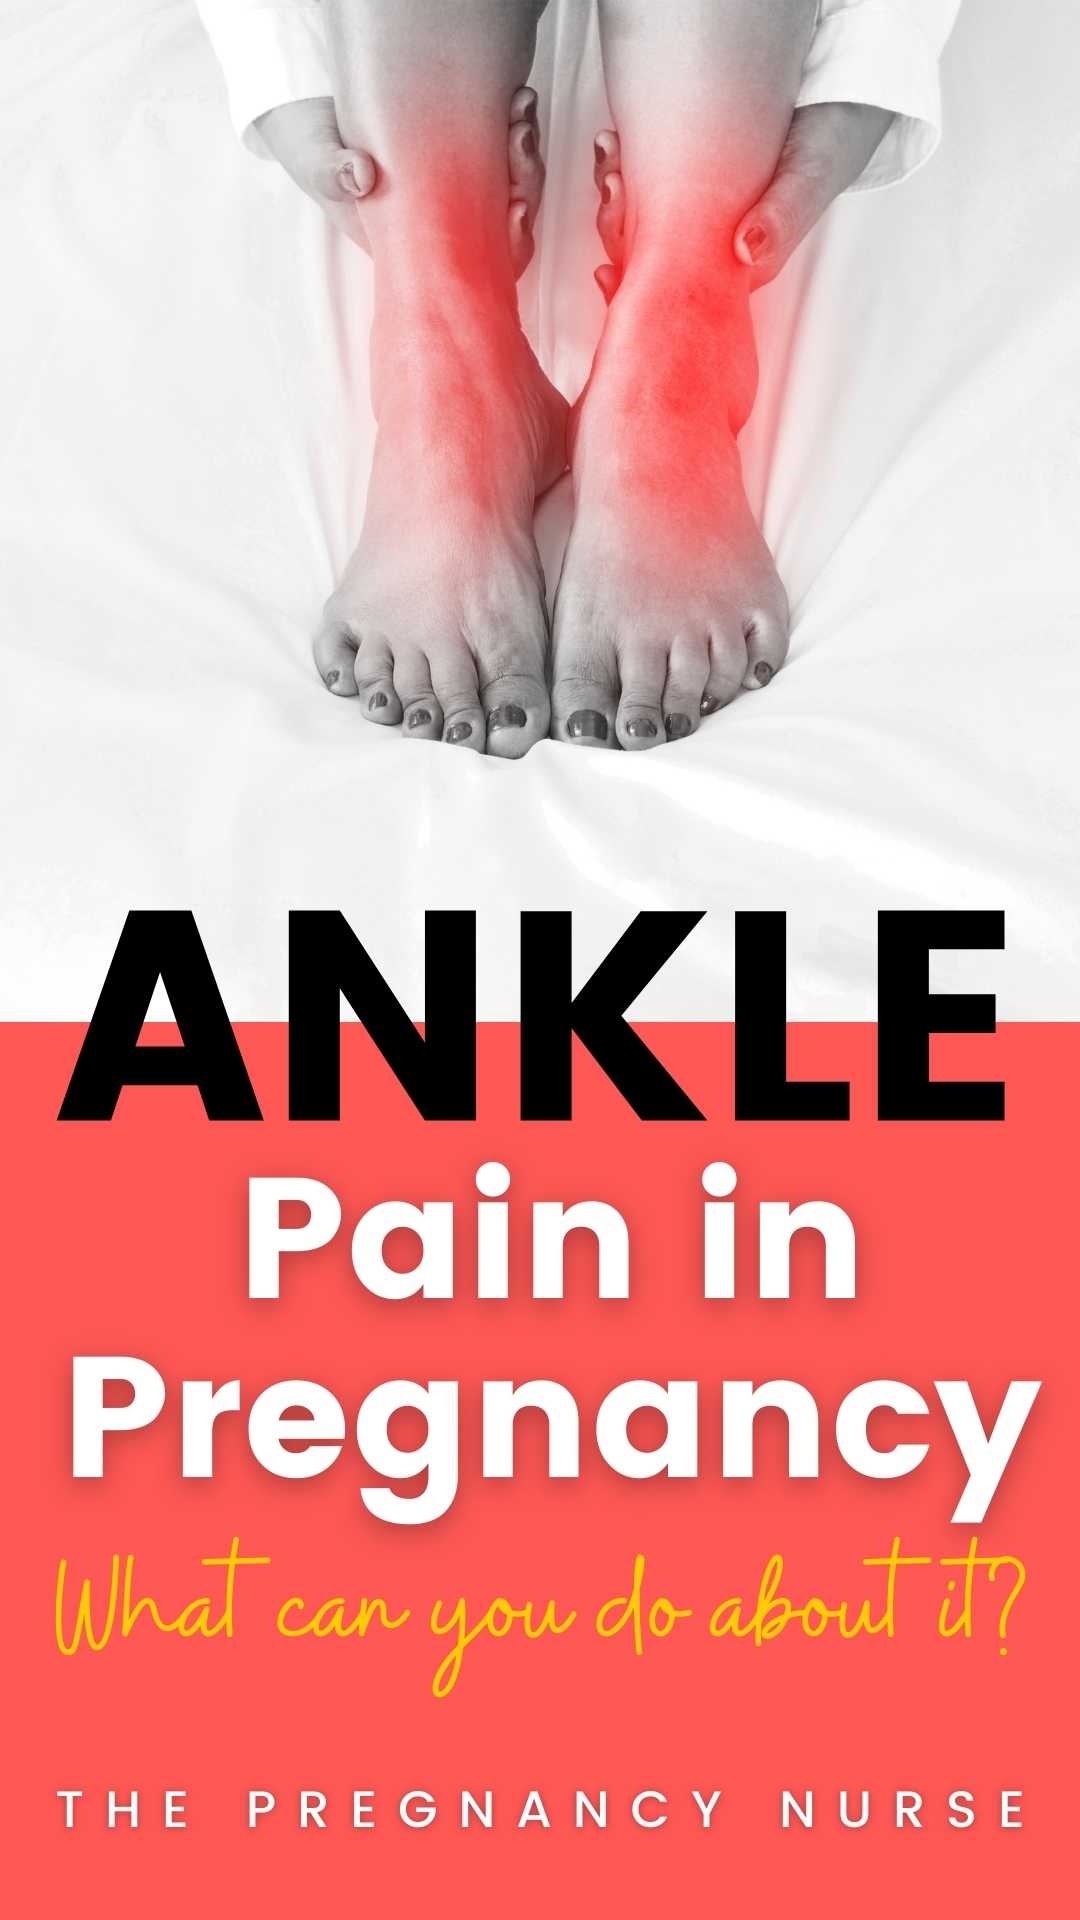 If you're pregnant, you may be experiencing ankle pain. Don't worry, you're not alone! In this post, we'll discuss the causes of ankle pain during pregnancy and provide some tips on how to manage it. Keep reading for more information.